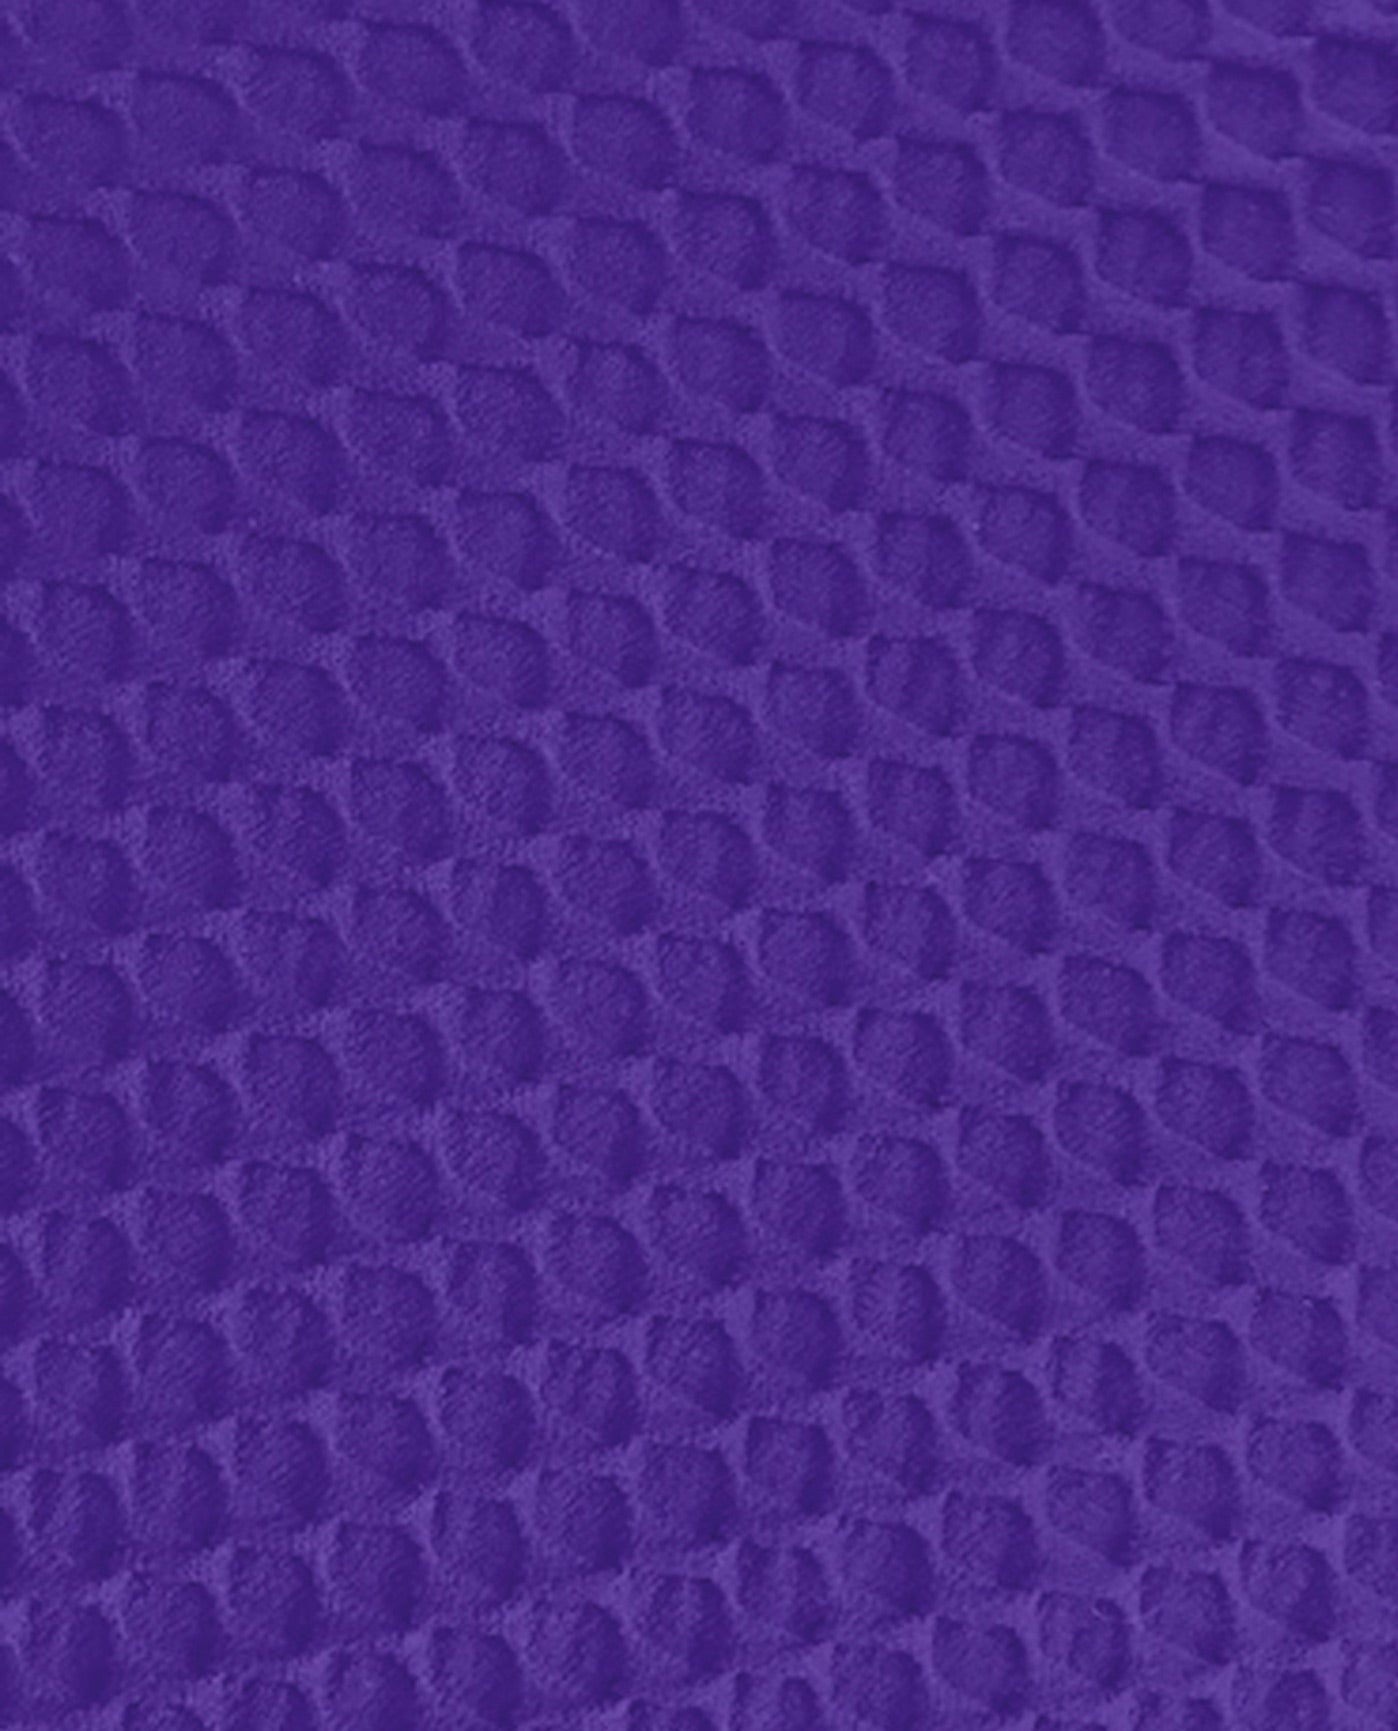 FABRIC SWATCH VIEW OF CHLORINE RESISTANT AQUAMORE SOLID TEXTURED SCOOP NECK LONG TORSO ONE PIECE SWIMSUIT | 510 AQT TEXTURED PURPLE